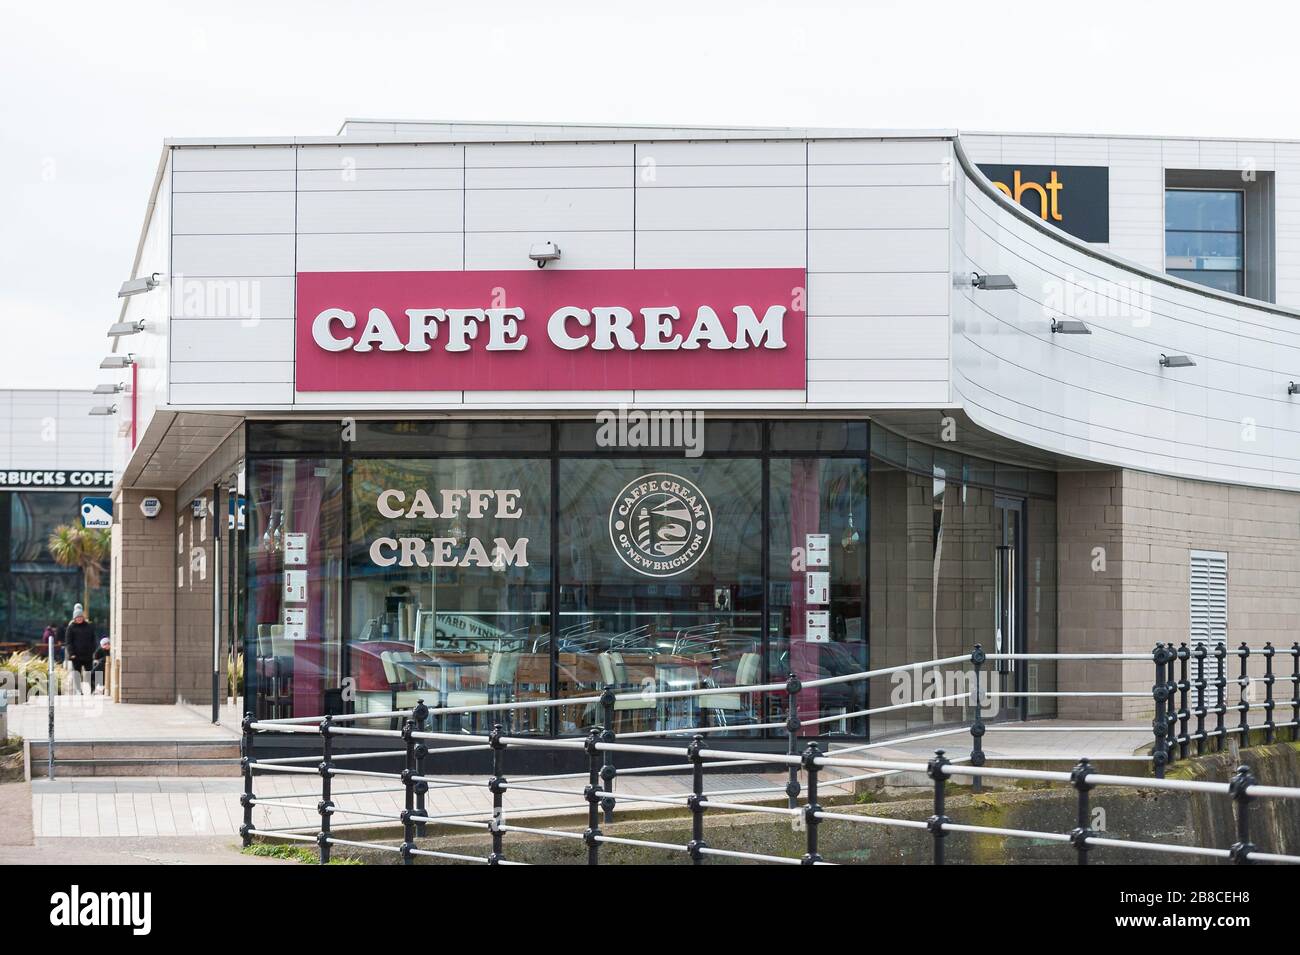 New Brighton, Wirral, UK. 12th March 2020. Using ‘takeaway’ as a loophole to ignore government instructions to close, Starbucks franchise stores owned by EuroGarages, and the other high street chain Costa Coffee, remain open to customers to go into the cafe area to order drinks to take out.  Although Starbucks have declared all UK stores will close, franchisees are not following.  Most other businesses in the area have followed government instructions and are closed.  The general public also don’t appear to be following government advice.  Credit: Paul Warburton/Alamy Live News Stock Photo